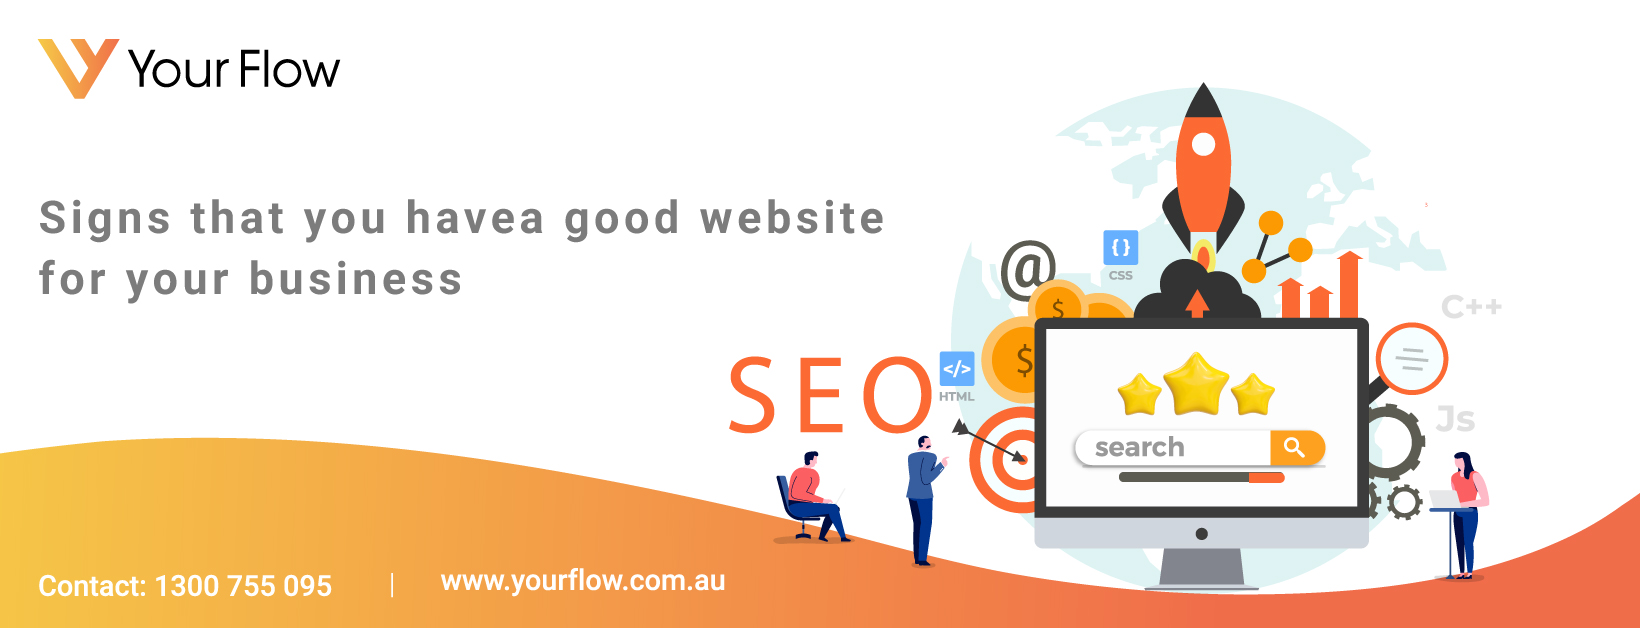 Signs That You Have A Good Website For Your Business